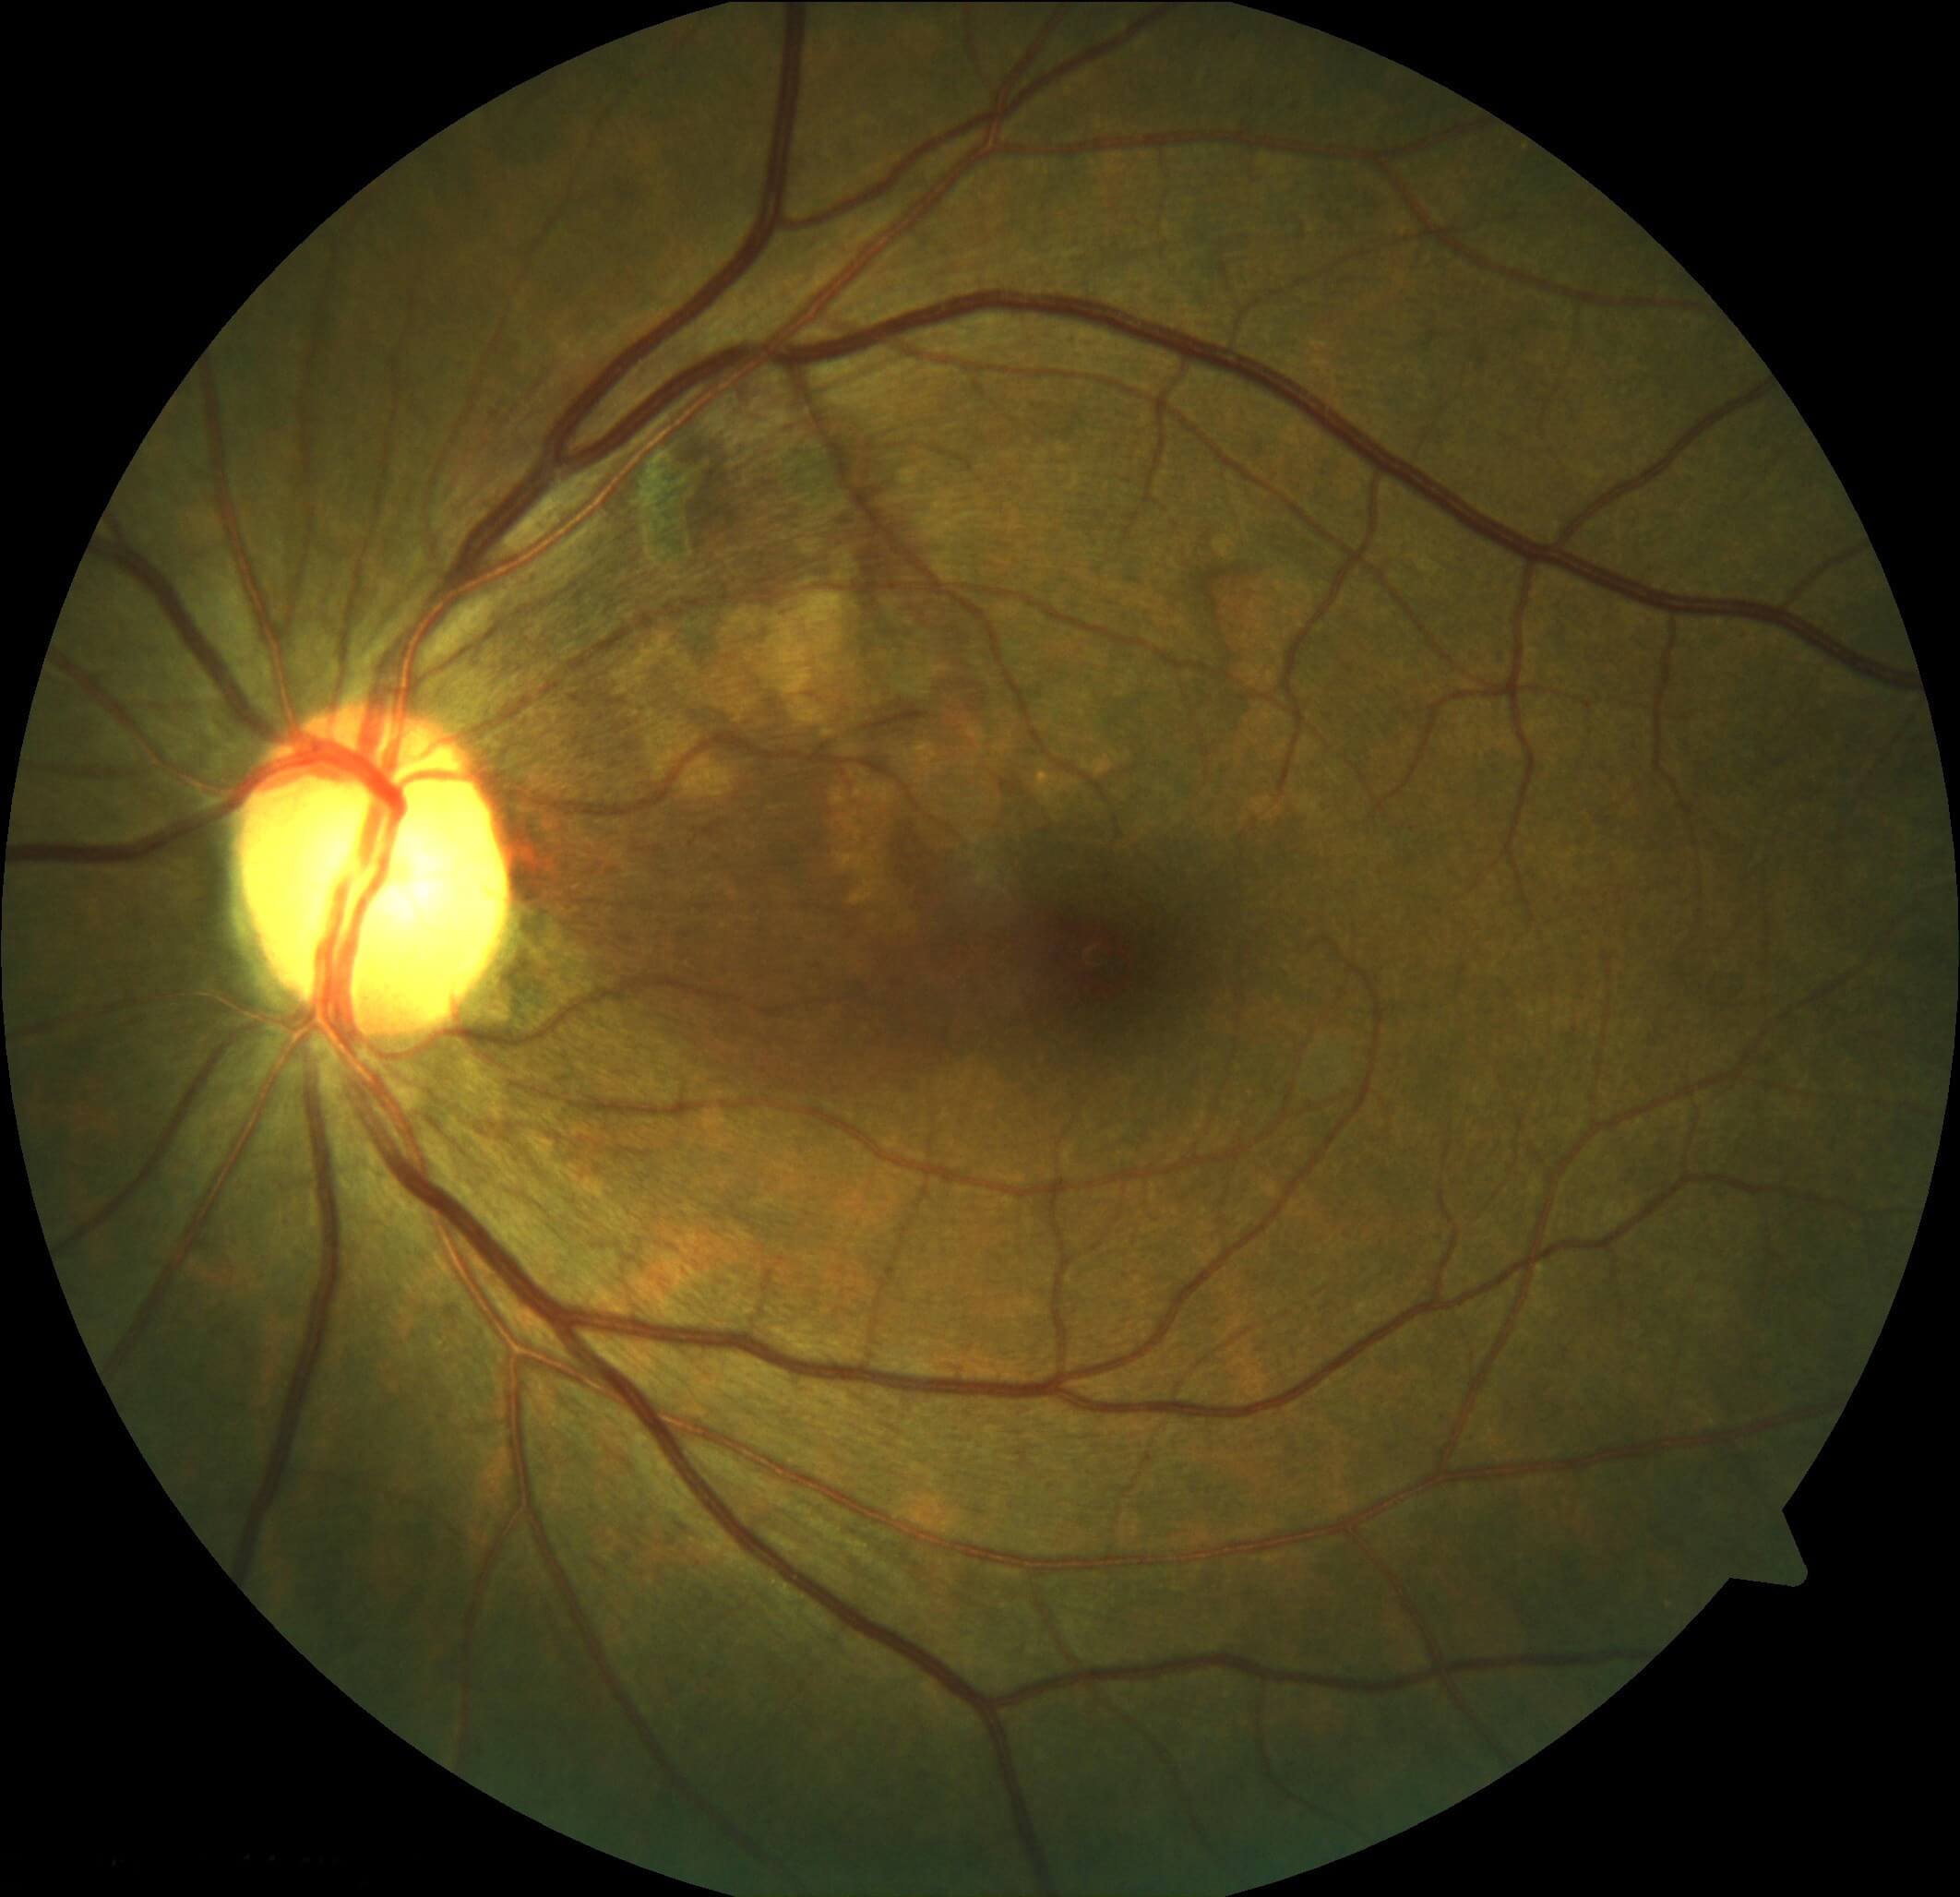 Postoperative left fundus photograph. There has been displacement the submacular haemorrhage with only mild residual haemorrhage remaining. The reddish-orange polypoidal lesions can still be seen superior to the fovea.